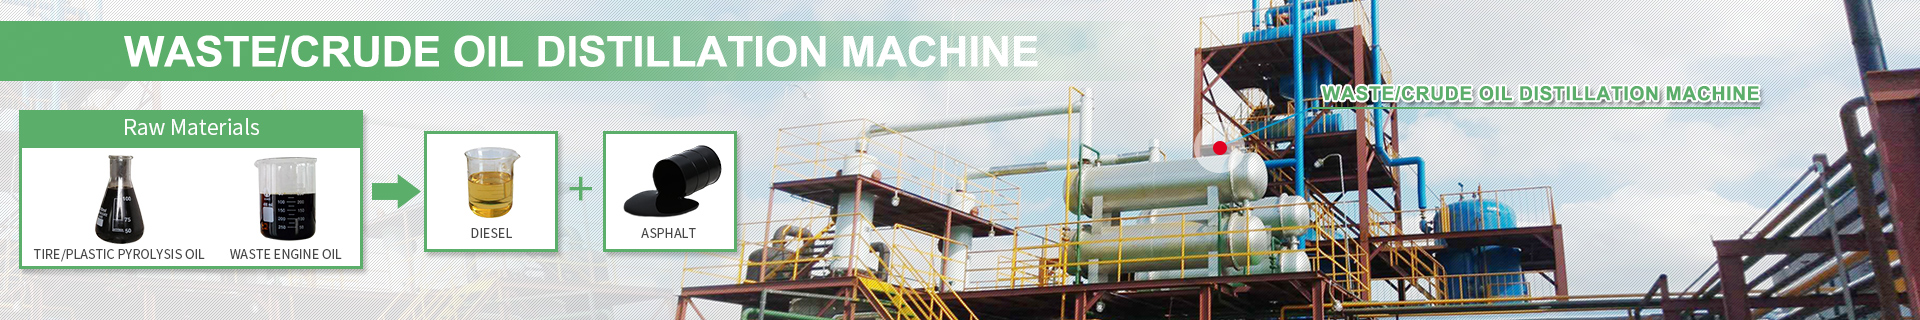 continuous pyrolysis plant